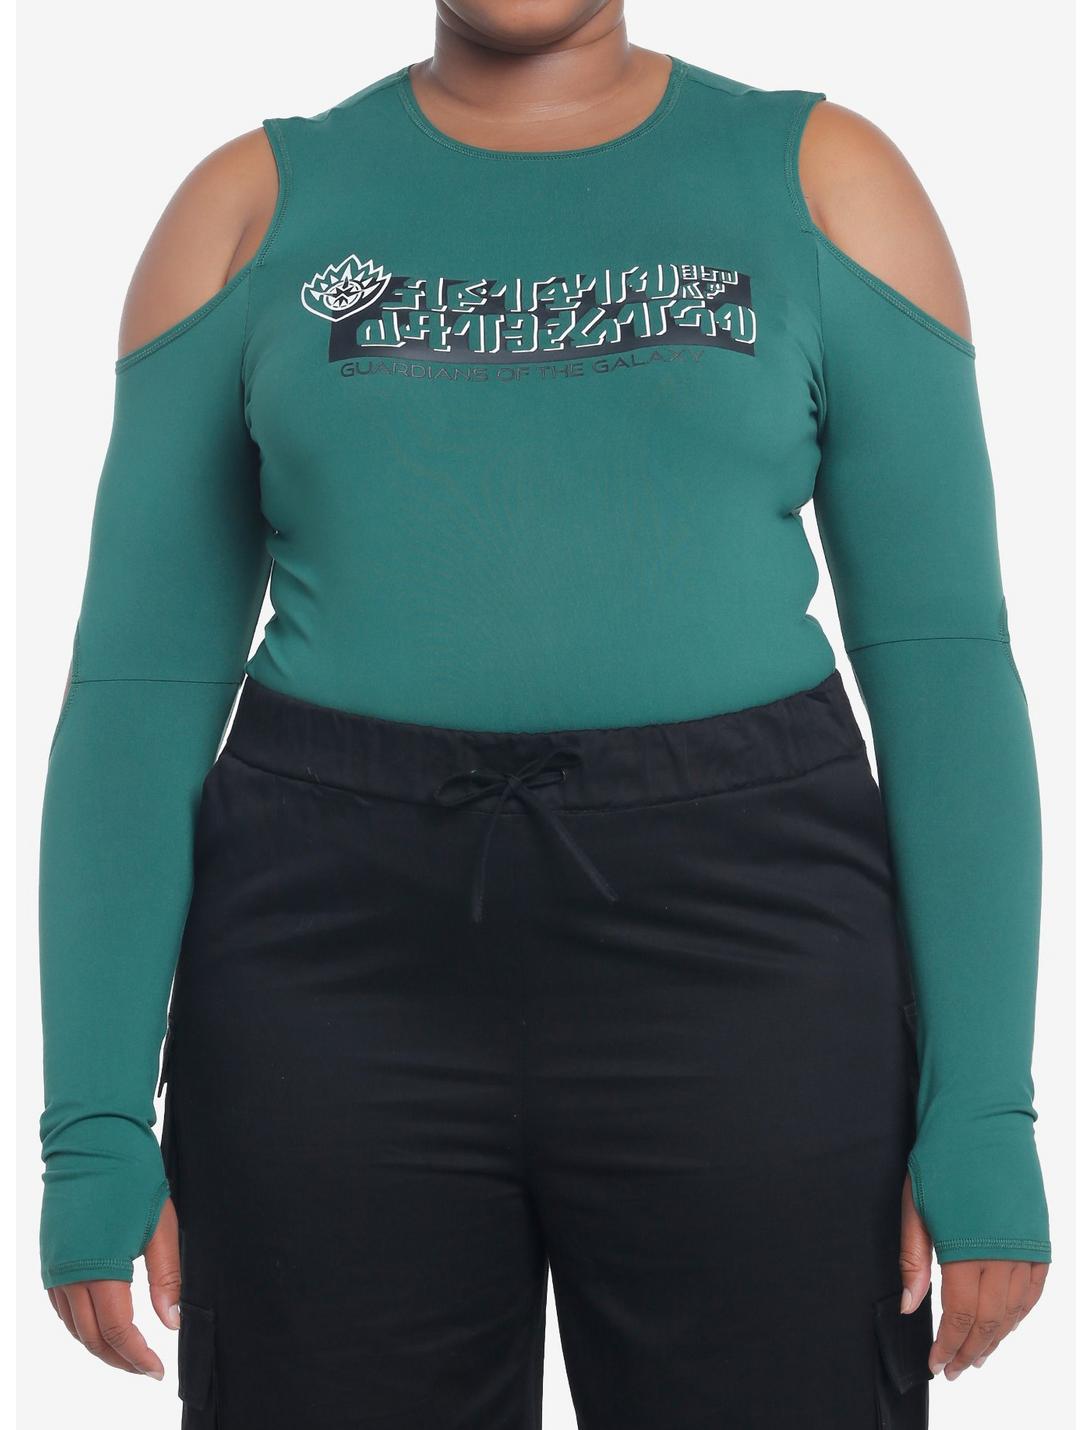 Her Universe Marvel Guardians Of The Galaxy: Volume 3 Mantis Long-Sleeve Top Plus Size, DARK GREEN, hi-res